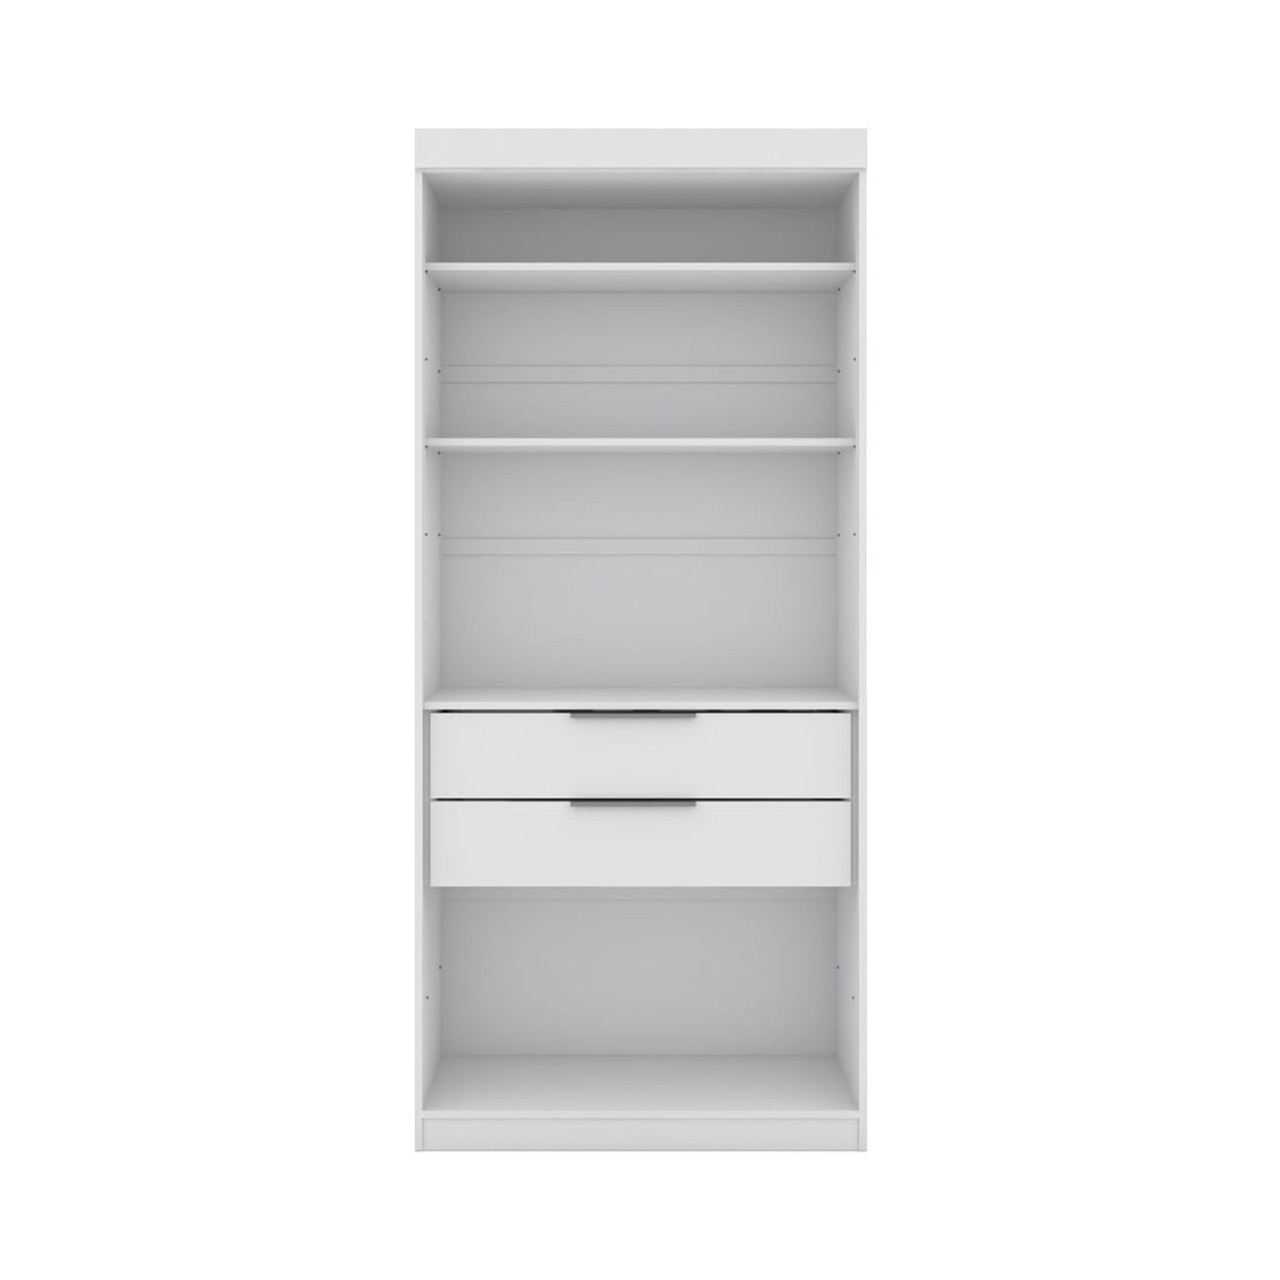 Mulberry Open 1 Sectional Closet in White